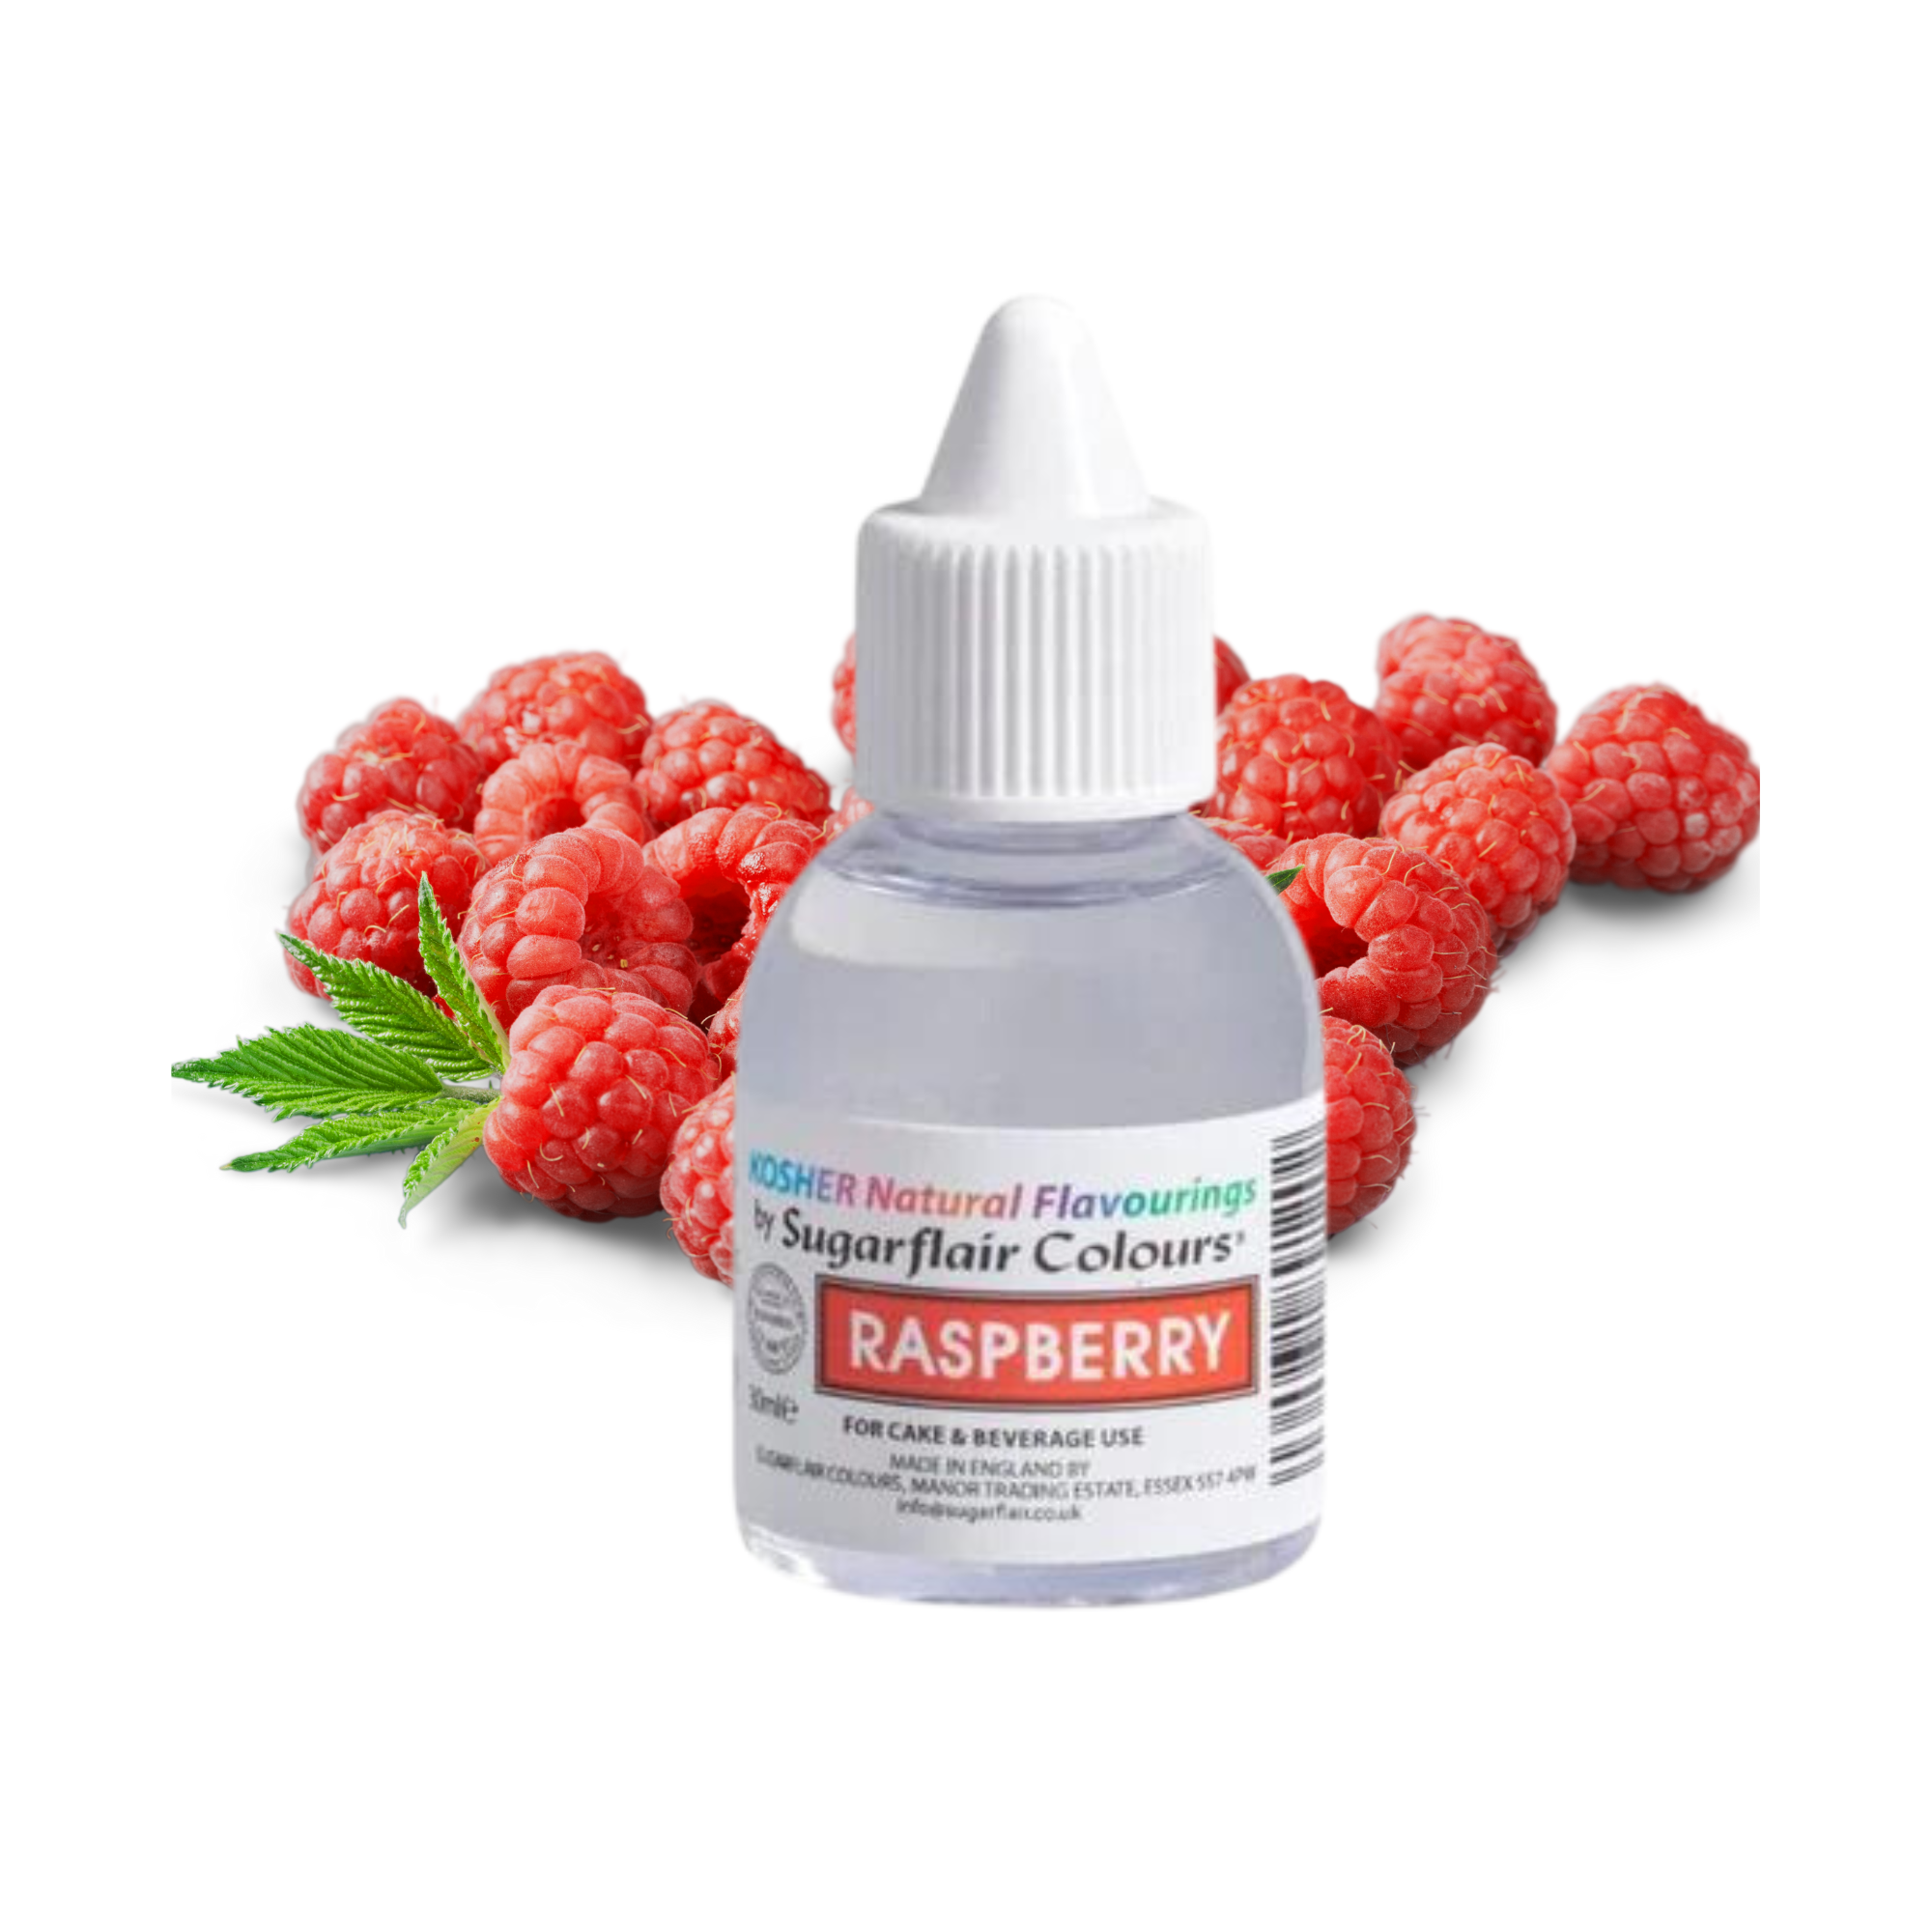 Sugarflair Raspberry - Kosher Concentrated Natural Flavour / Food Flavouring 30ml